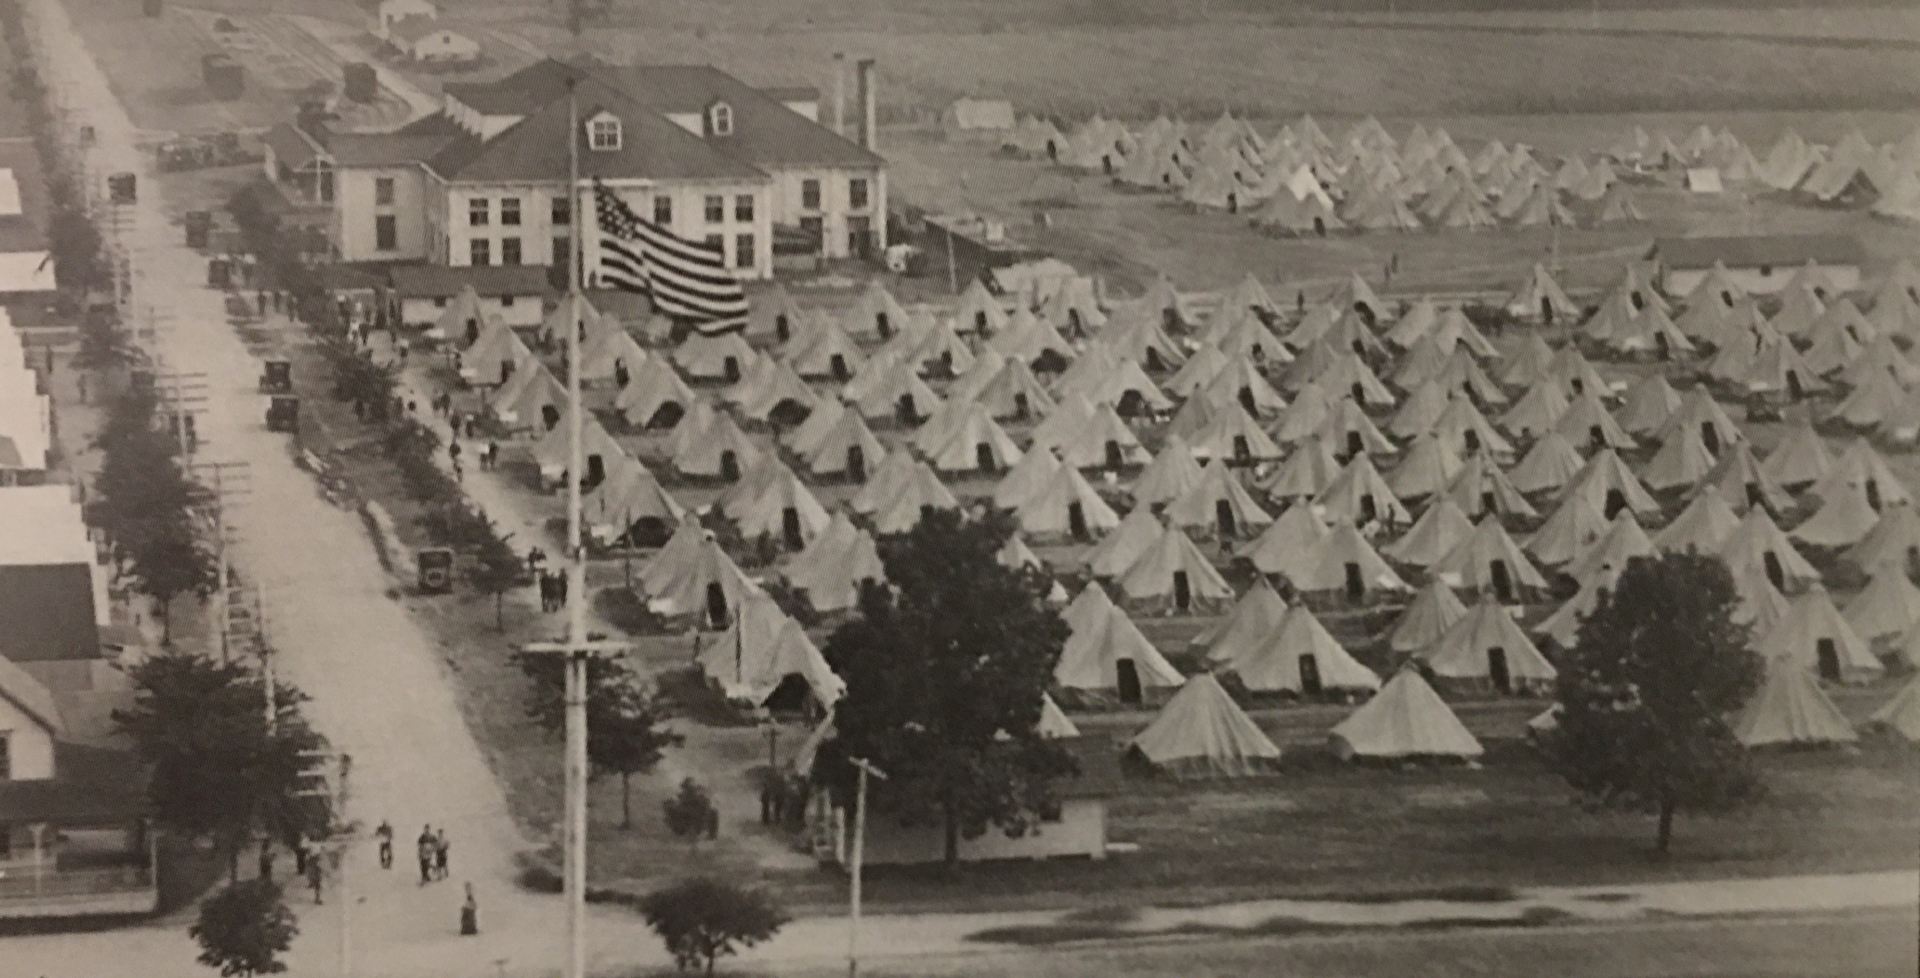 Camp Perry, Ohio, circa 1908 during the August National Matches